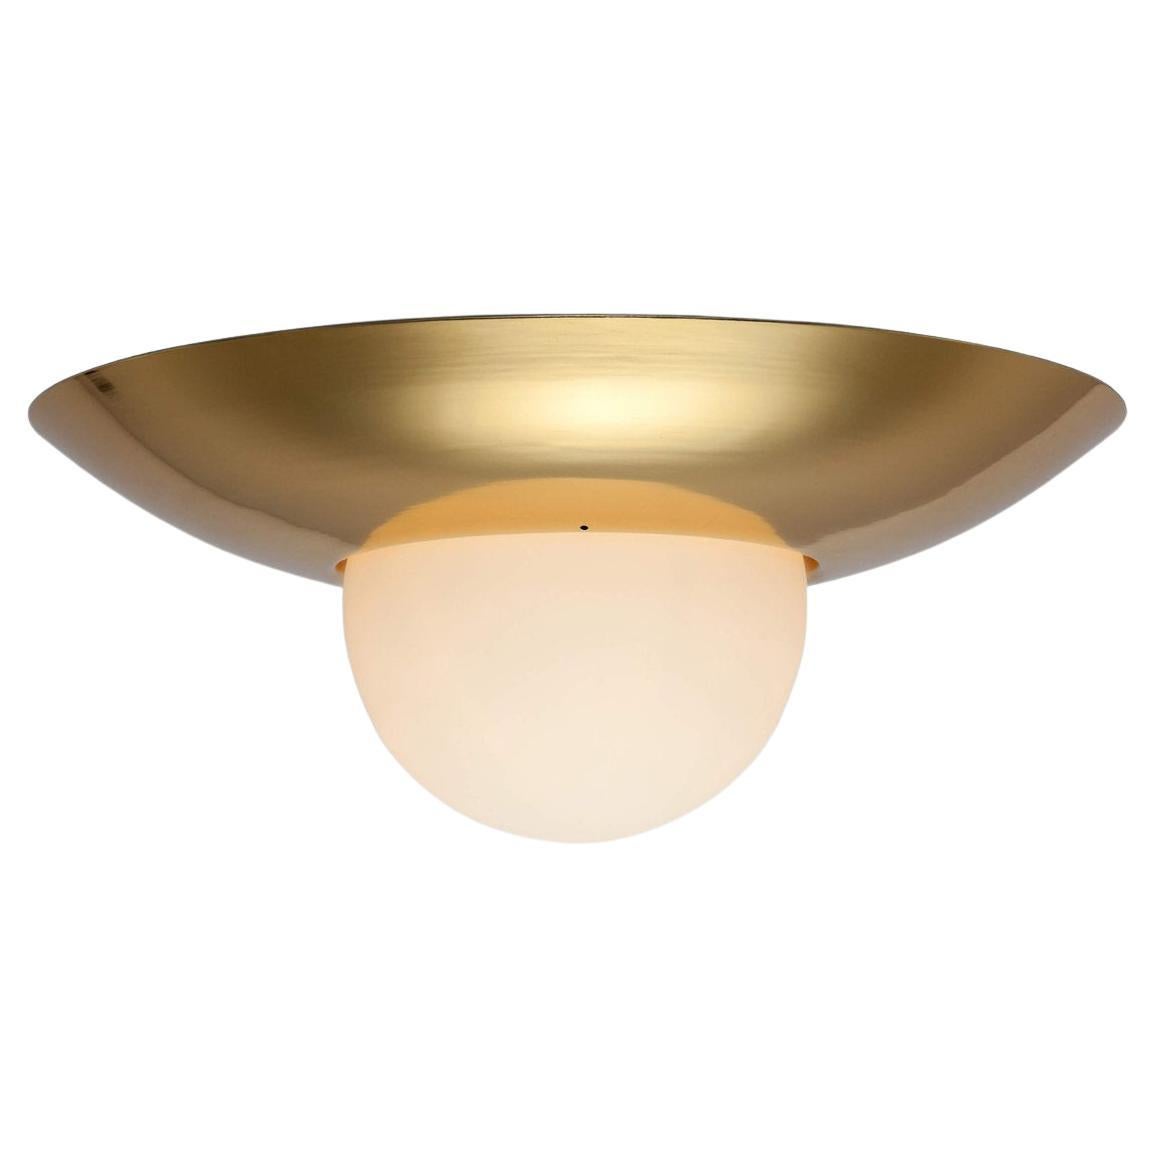 Houseof Brass Dome Flush Ceiling Light with Opal Glass Shade